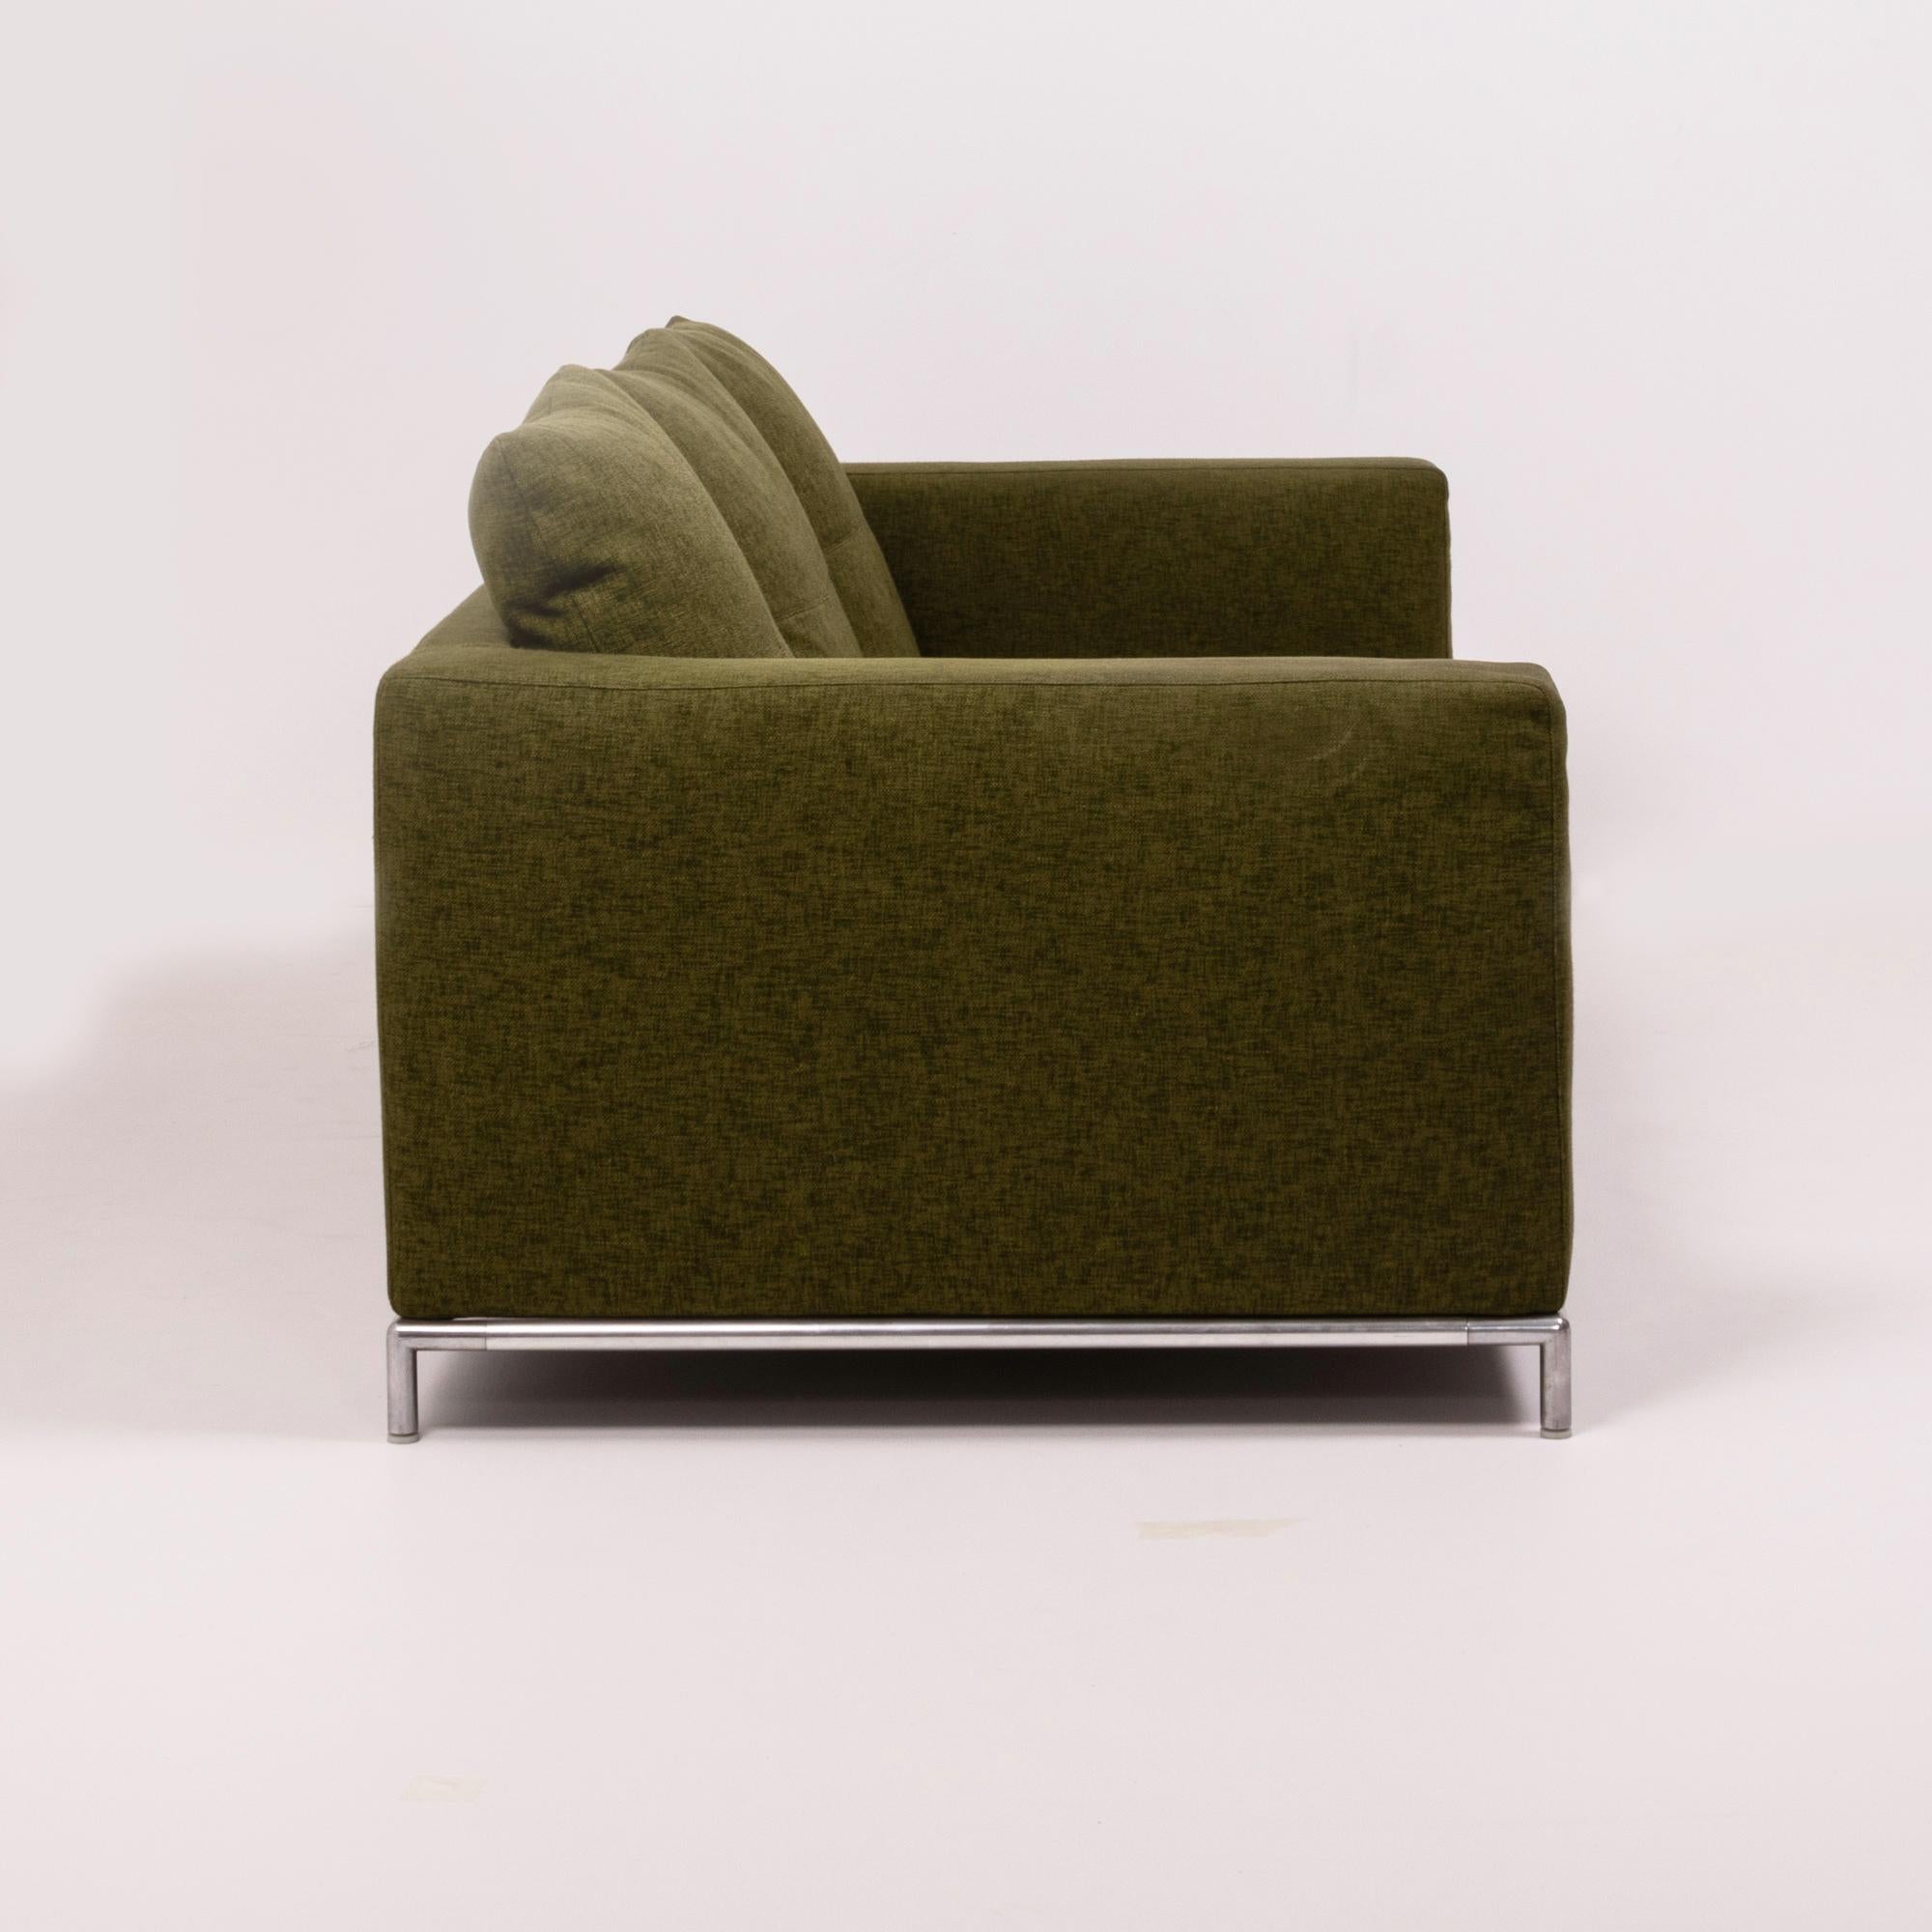 Originally designed in 2001 by Antonio Citterio for B&B Italia, this George three-seat sofa offers both comfort and style. 

The sofa features a slim tubular steel frame with protective glides and is fully upholstered in a beautiful olive green